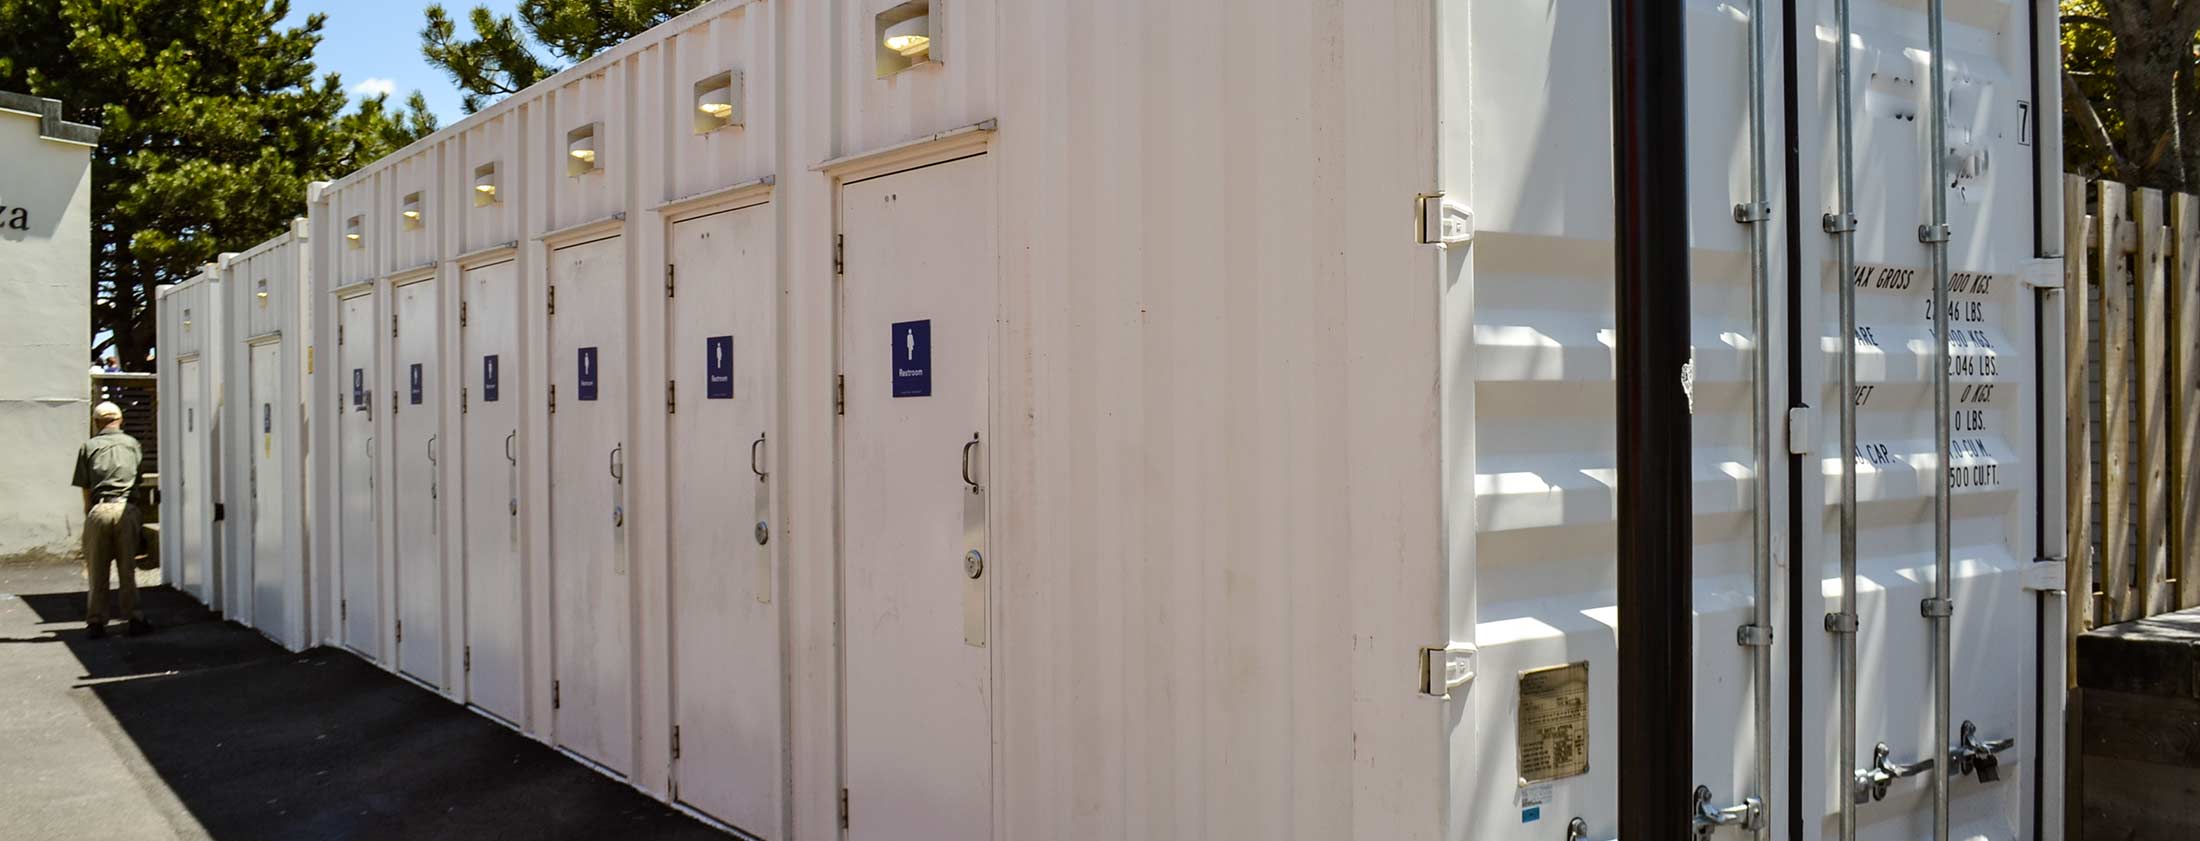 shipping-container-restrooms